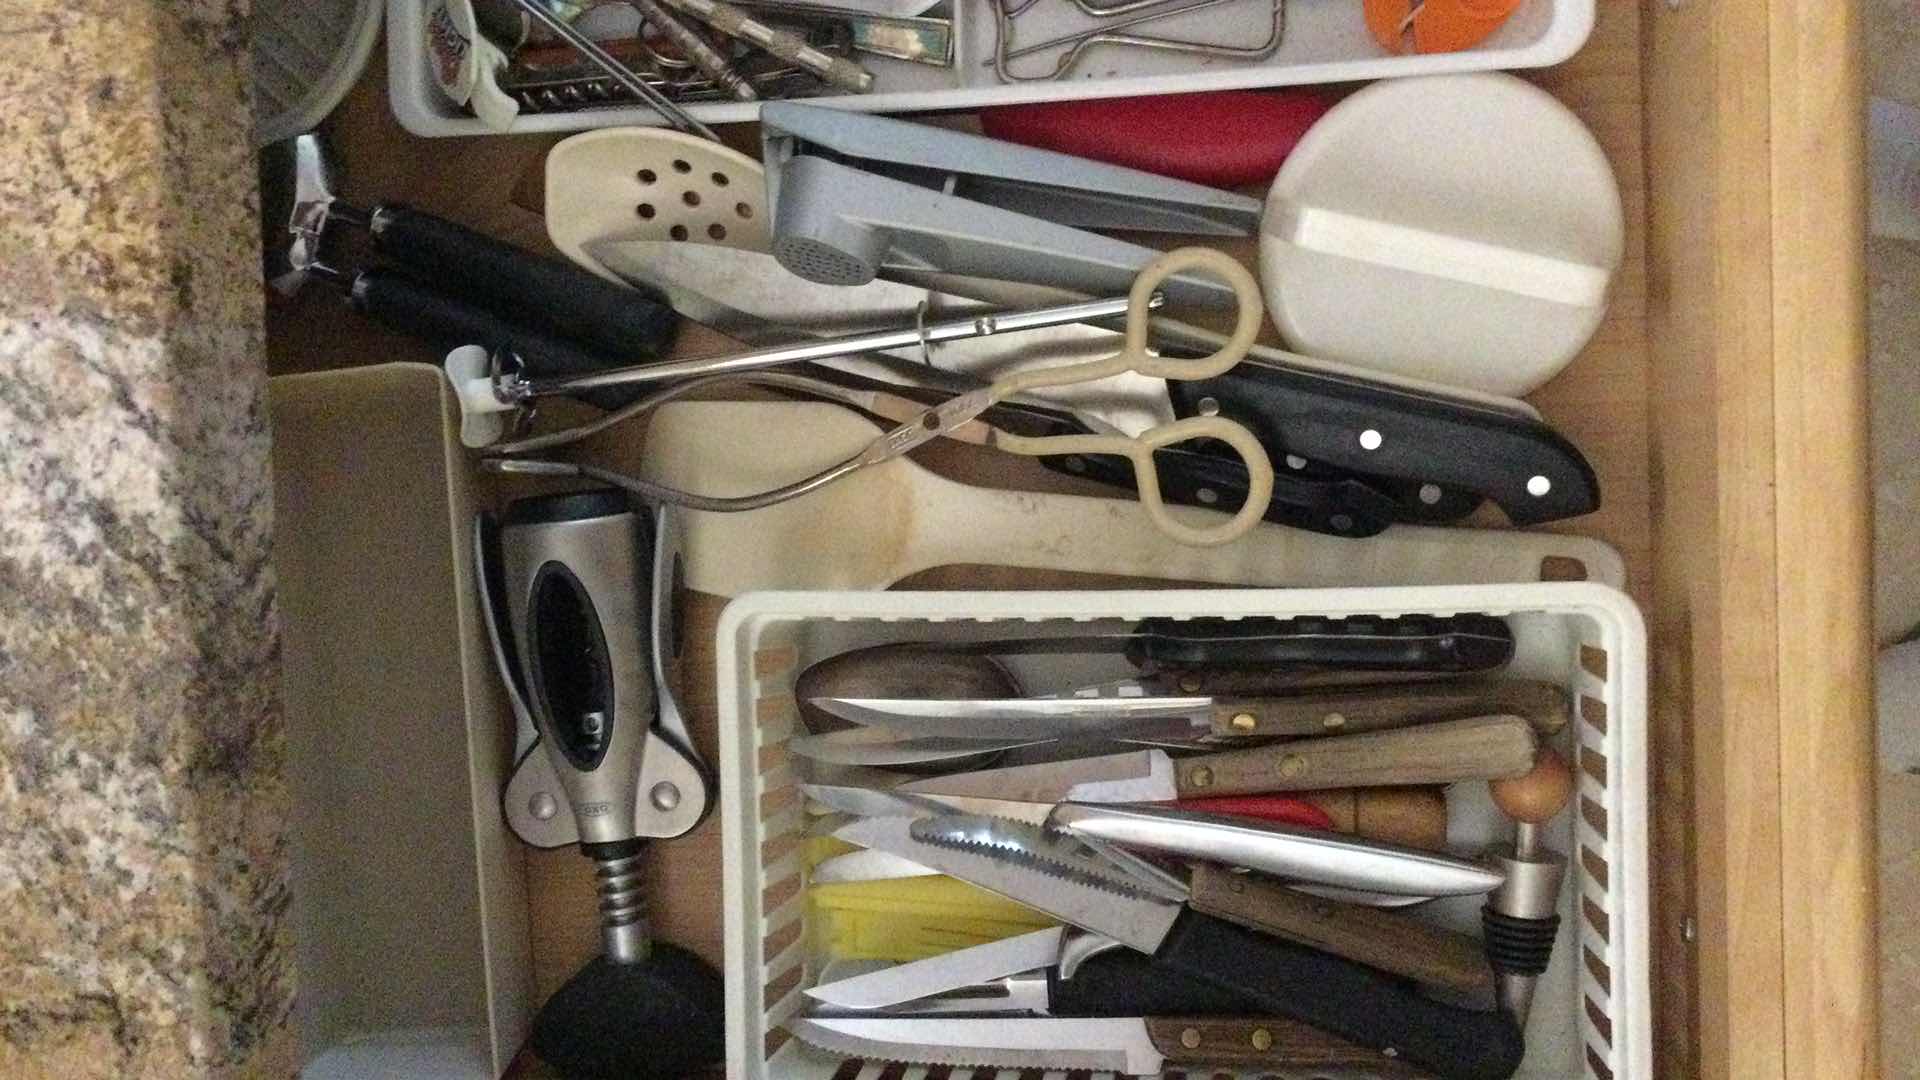 Photo 2 of CONTENTS IN KITCHEN DRAWER TOOLS & UTENSILS